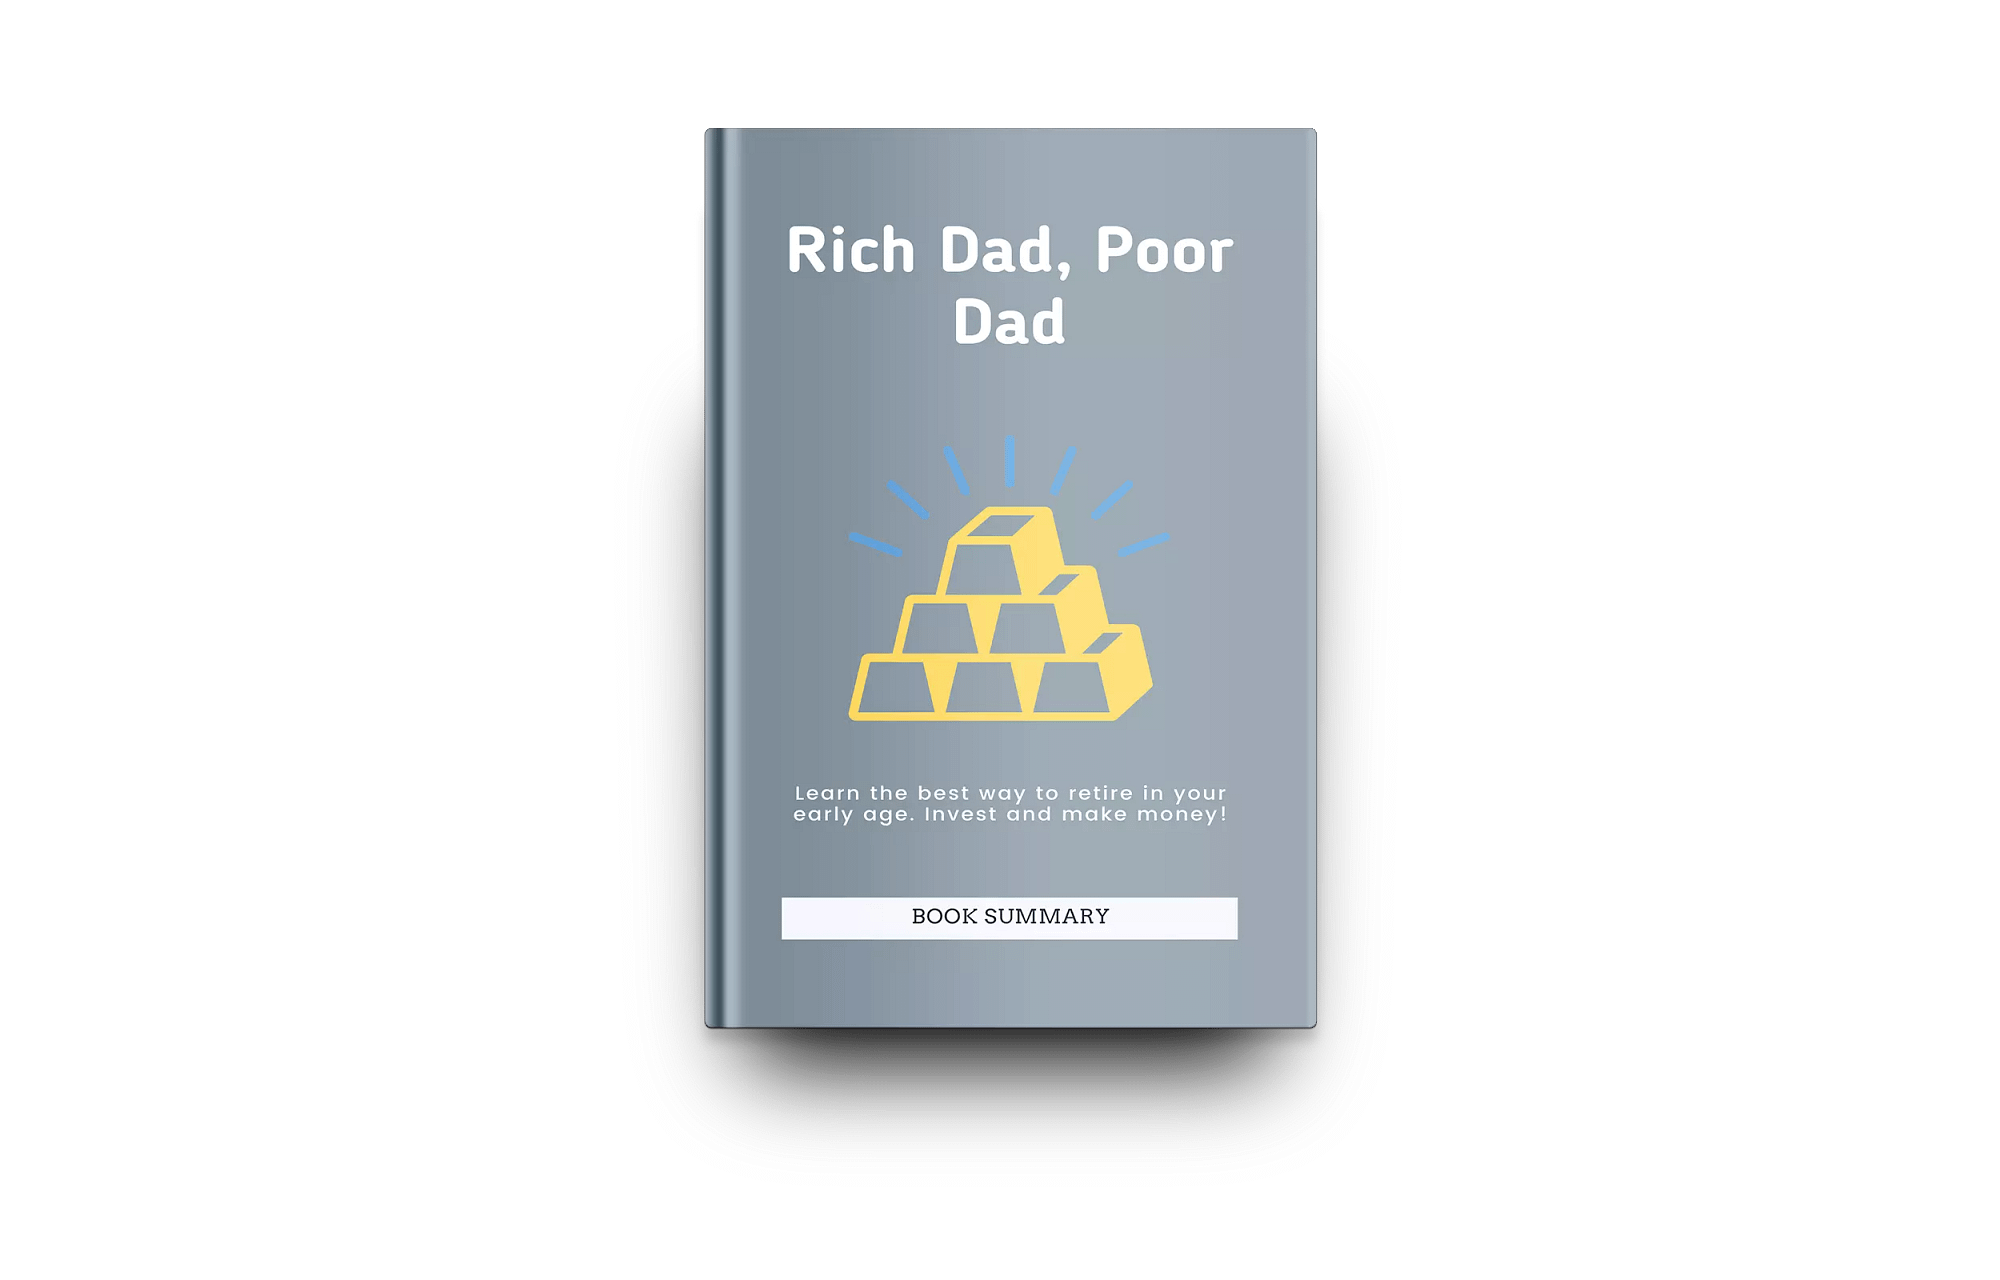 Rich dad poor dad guide to investing summary judgment uk investing in us shares today